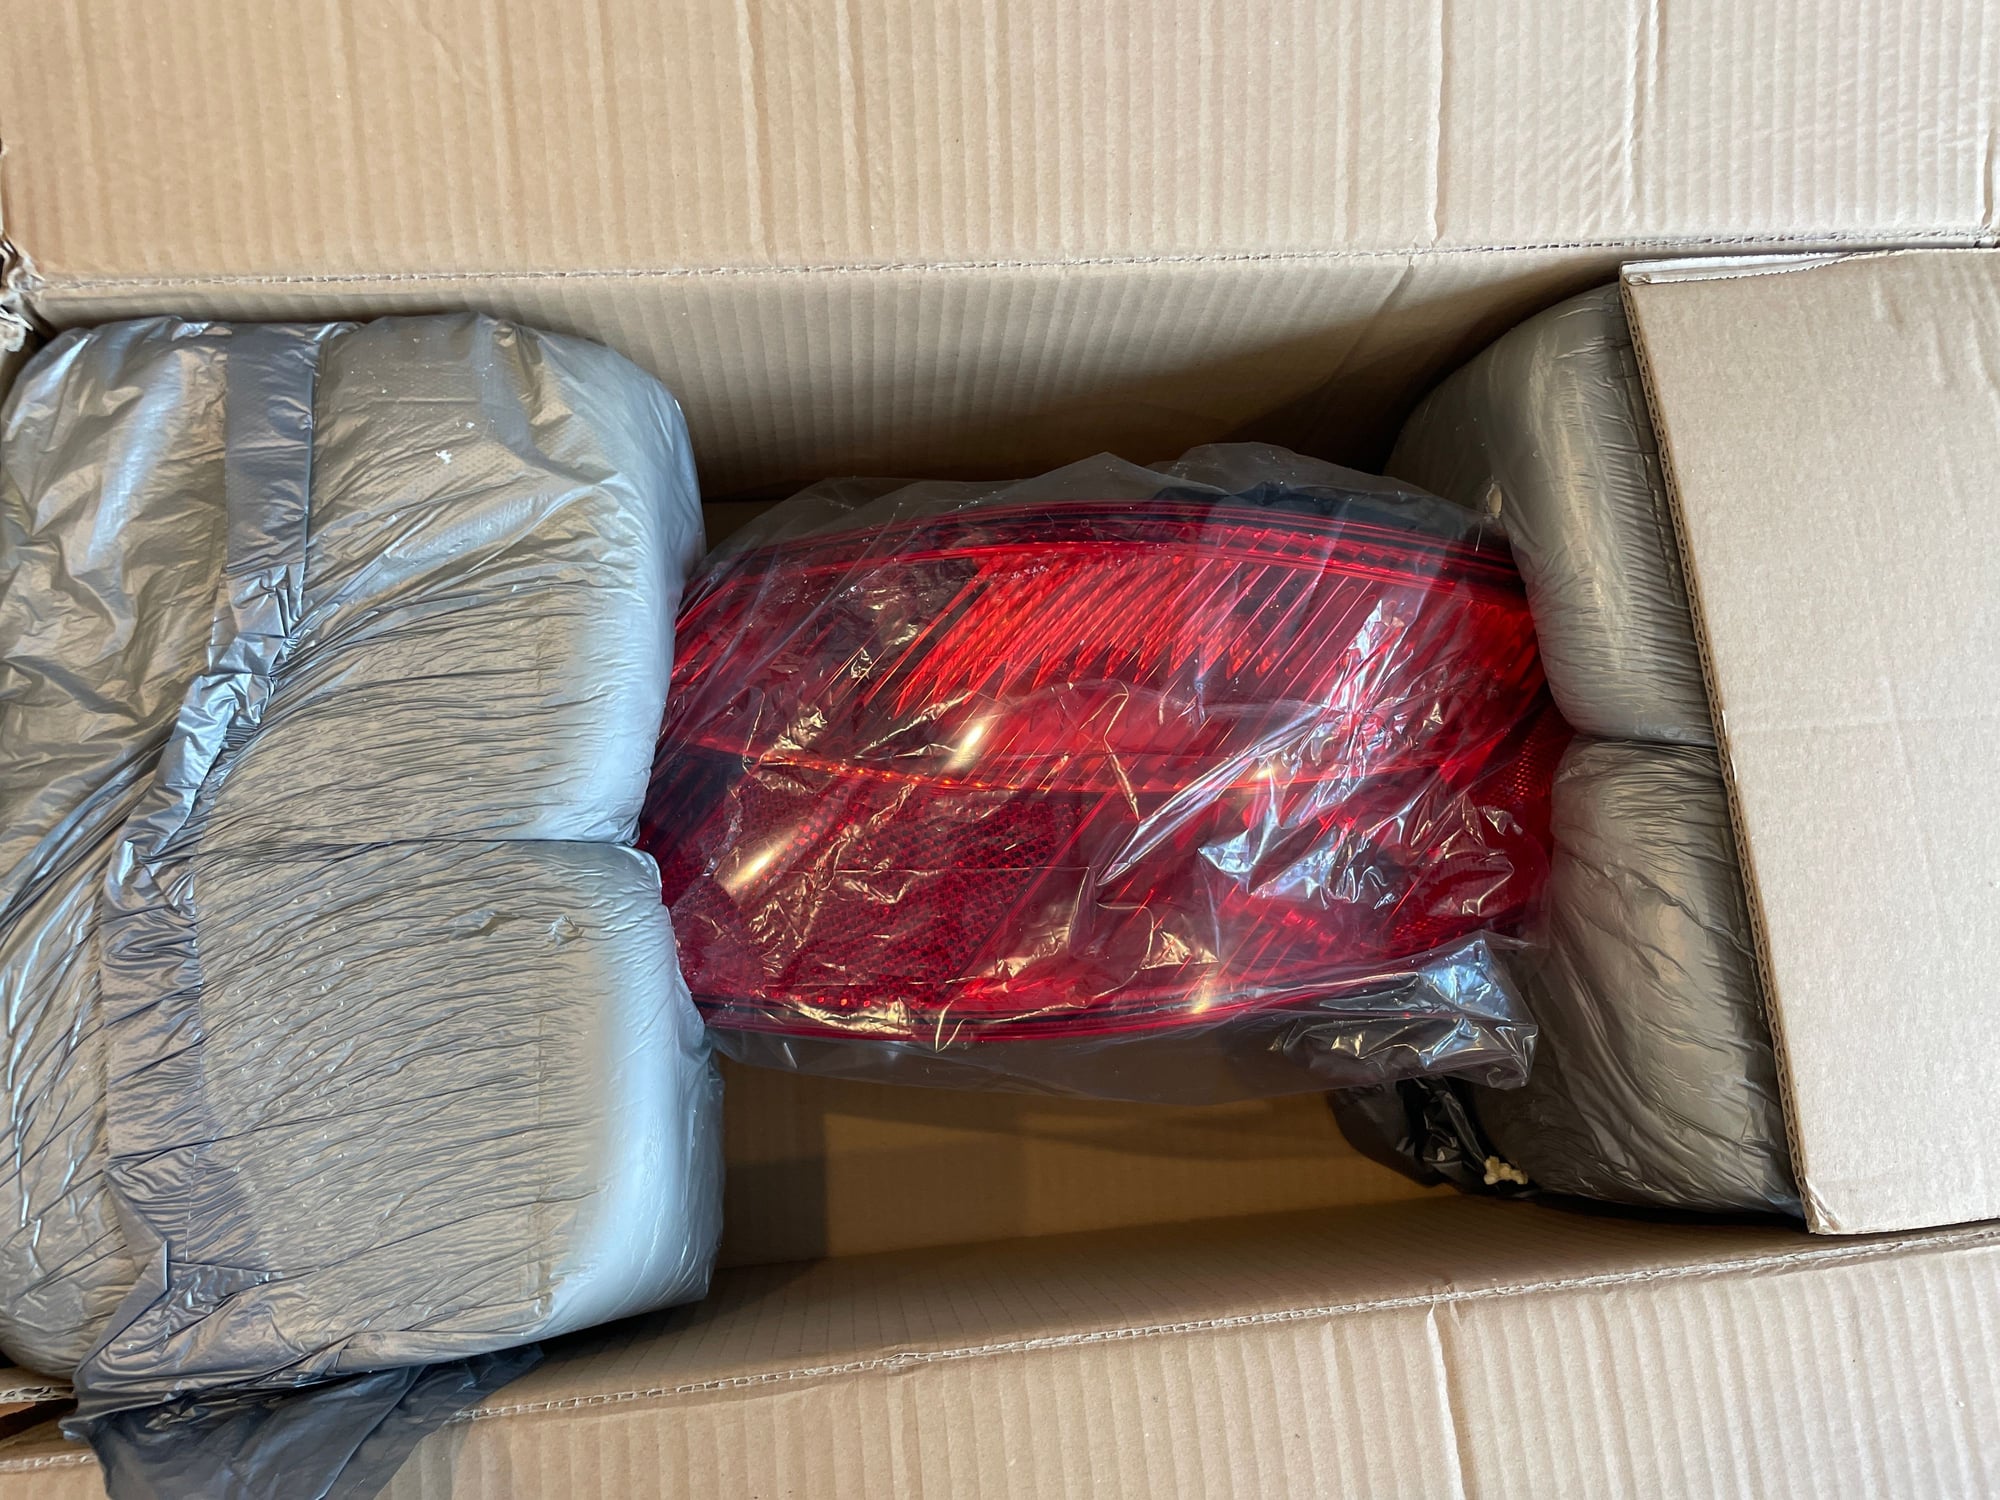 Exterior Body Parts - 987 Boxster / Cayman All Red Right Tail Light - Used - Boston, MA 2127, United States